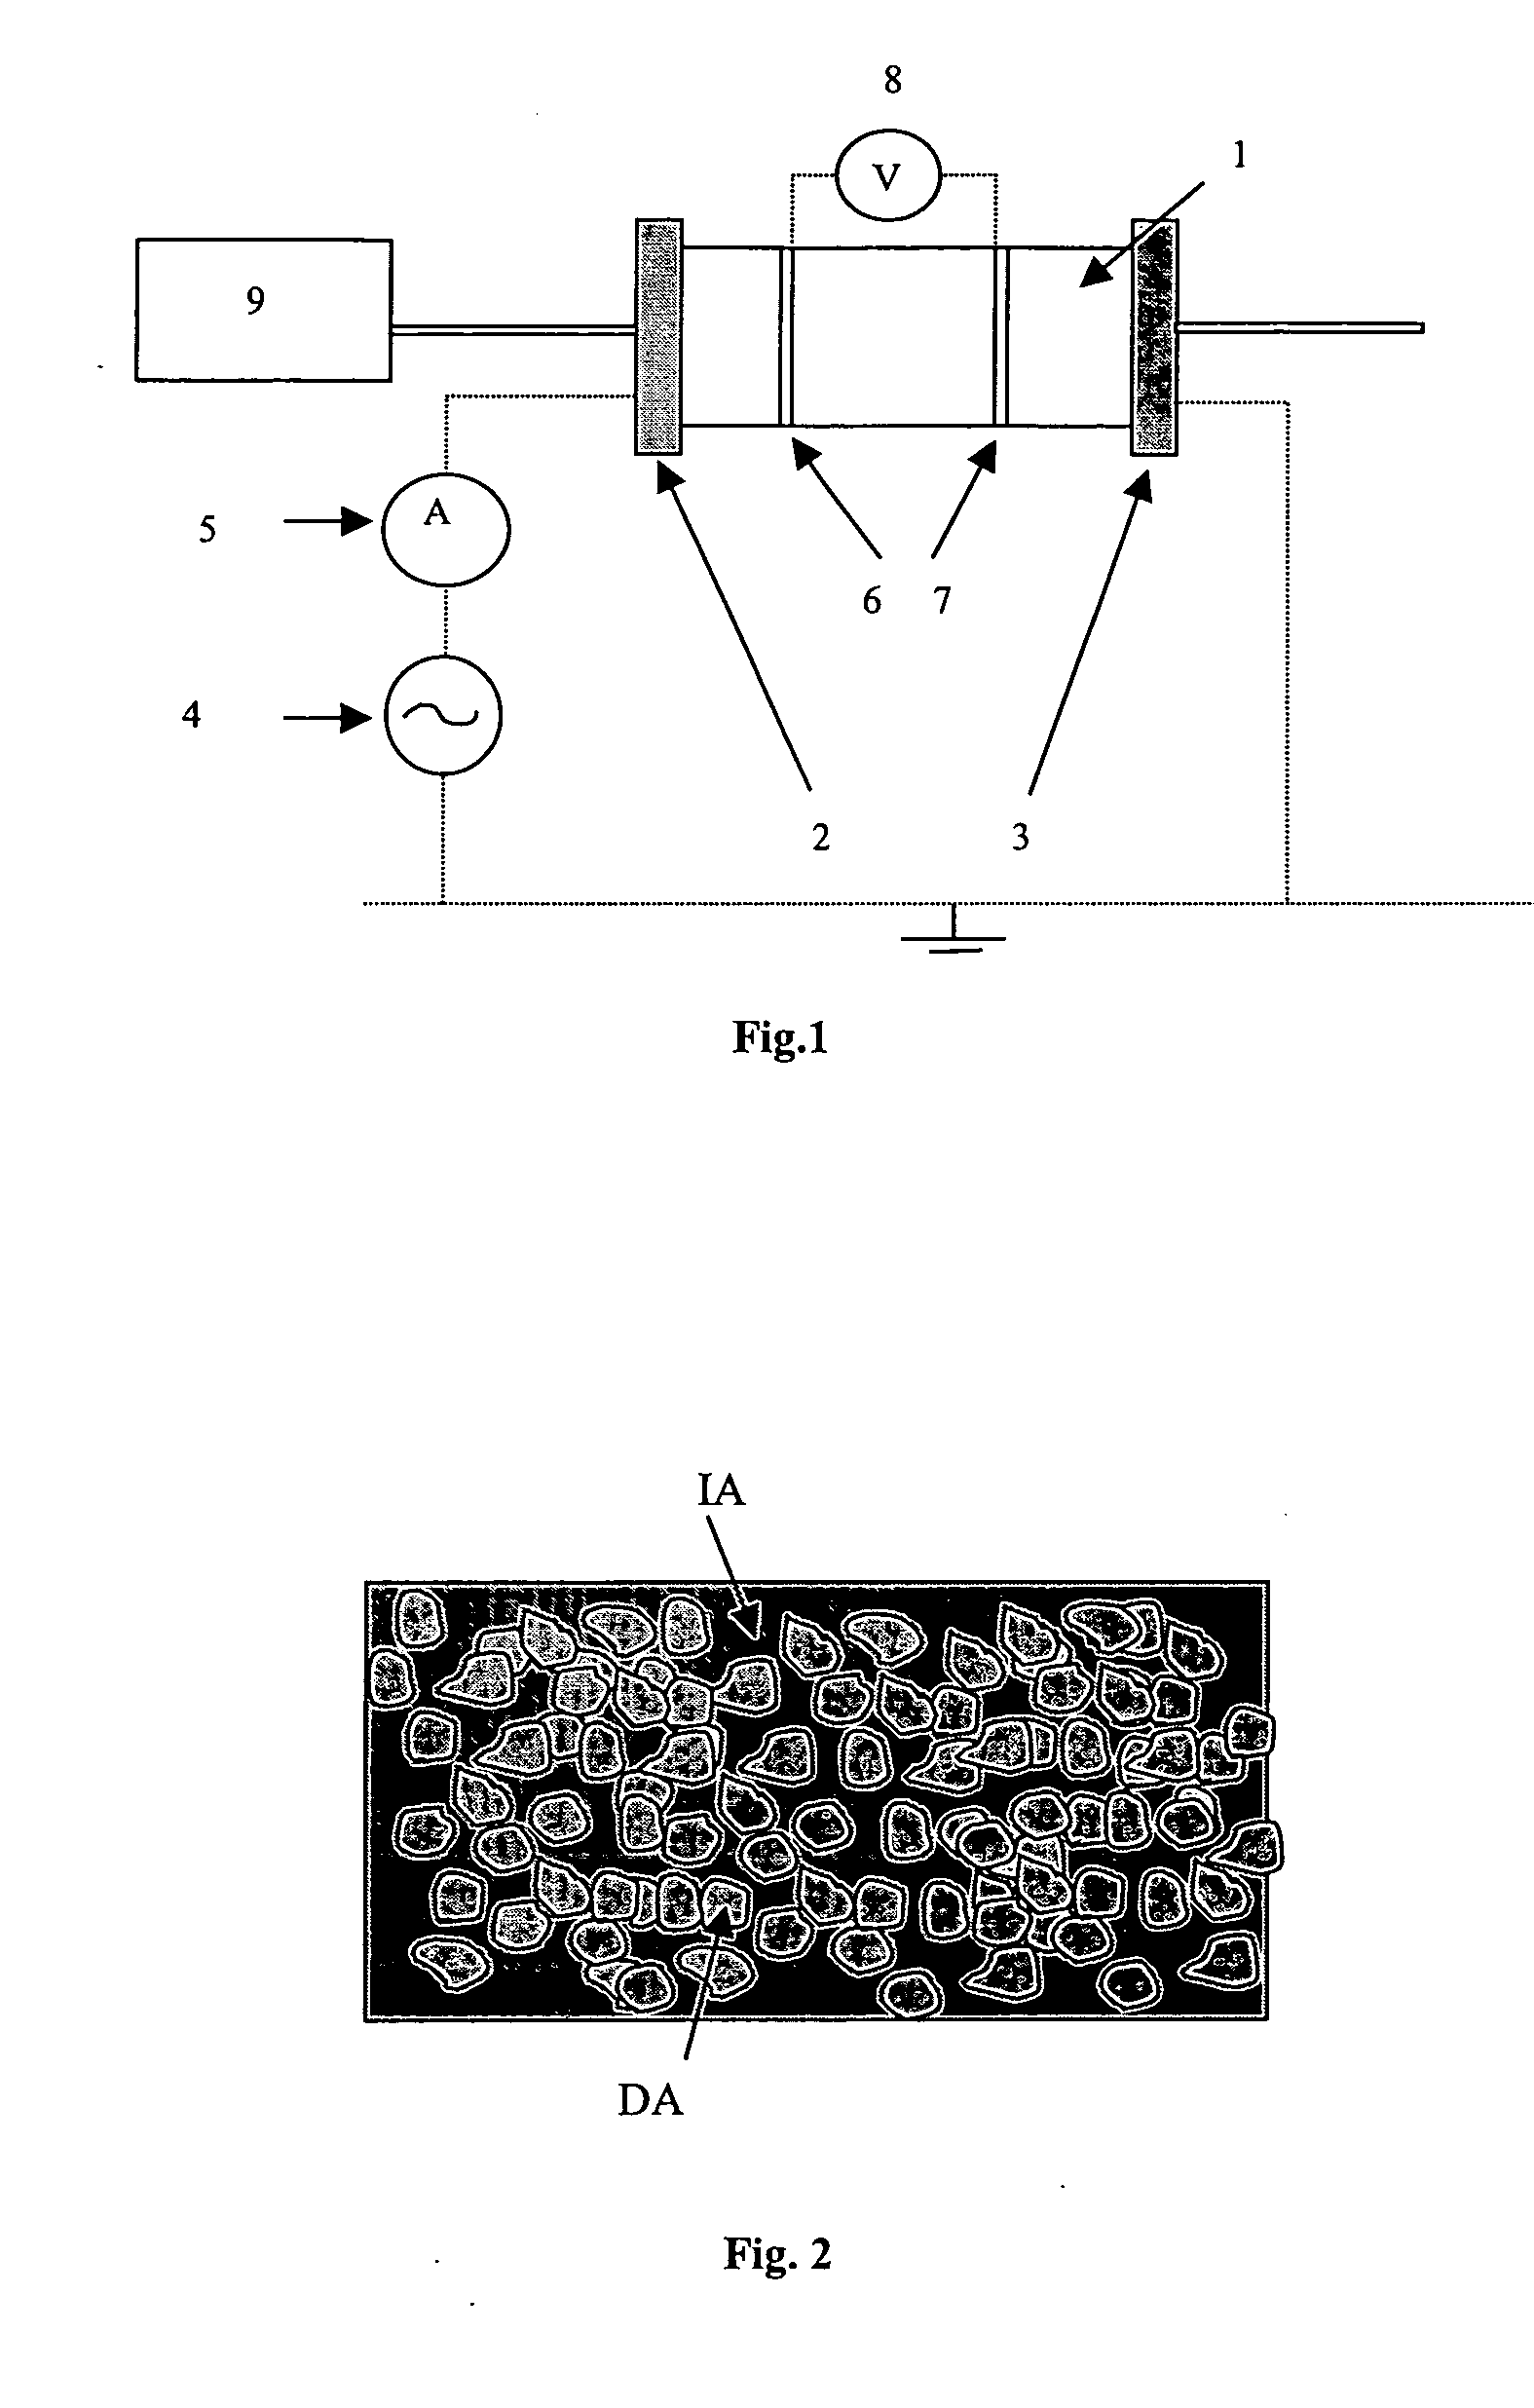 Method for determining of the formation factor for a subterranean deposit from measurements on drilling waste removed therefrom